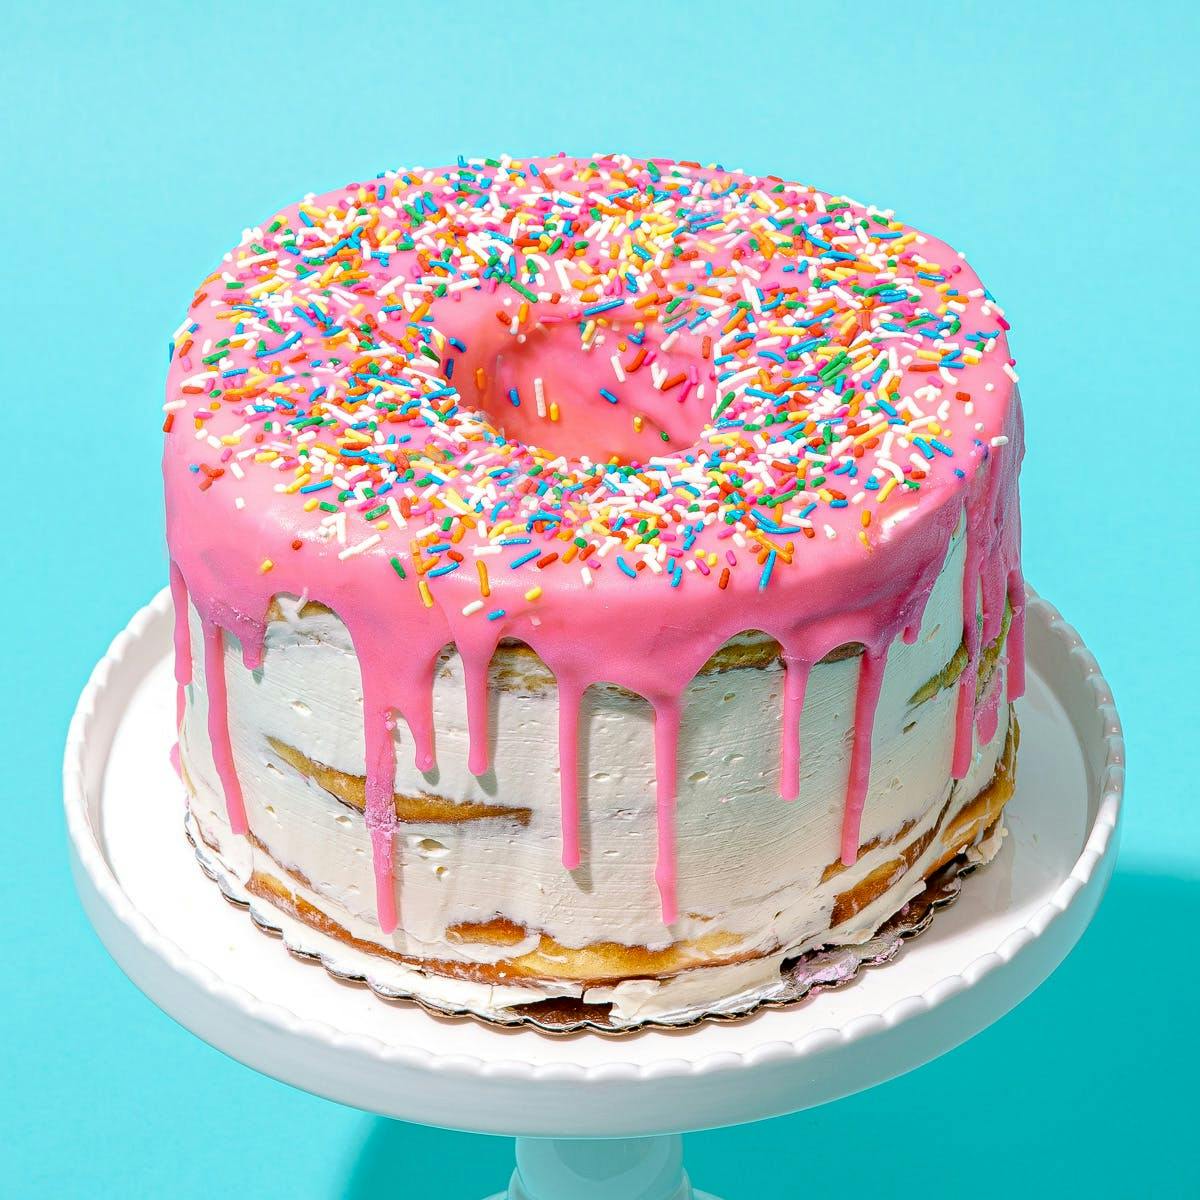 11 Unique Donut Cakes to Level Up Your Birthday - Let's Eat Cake